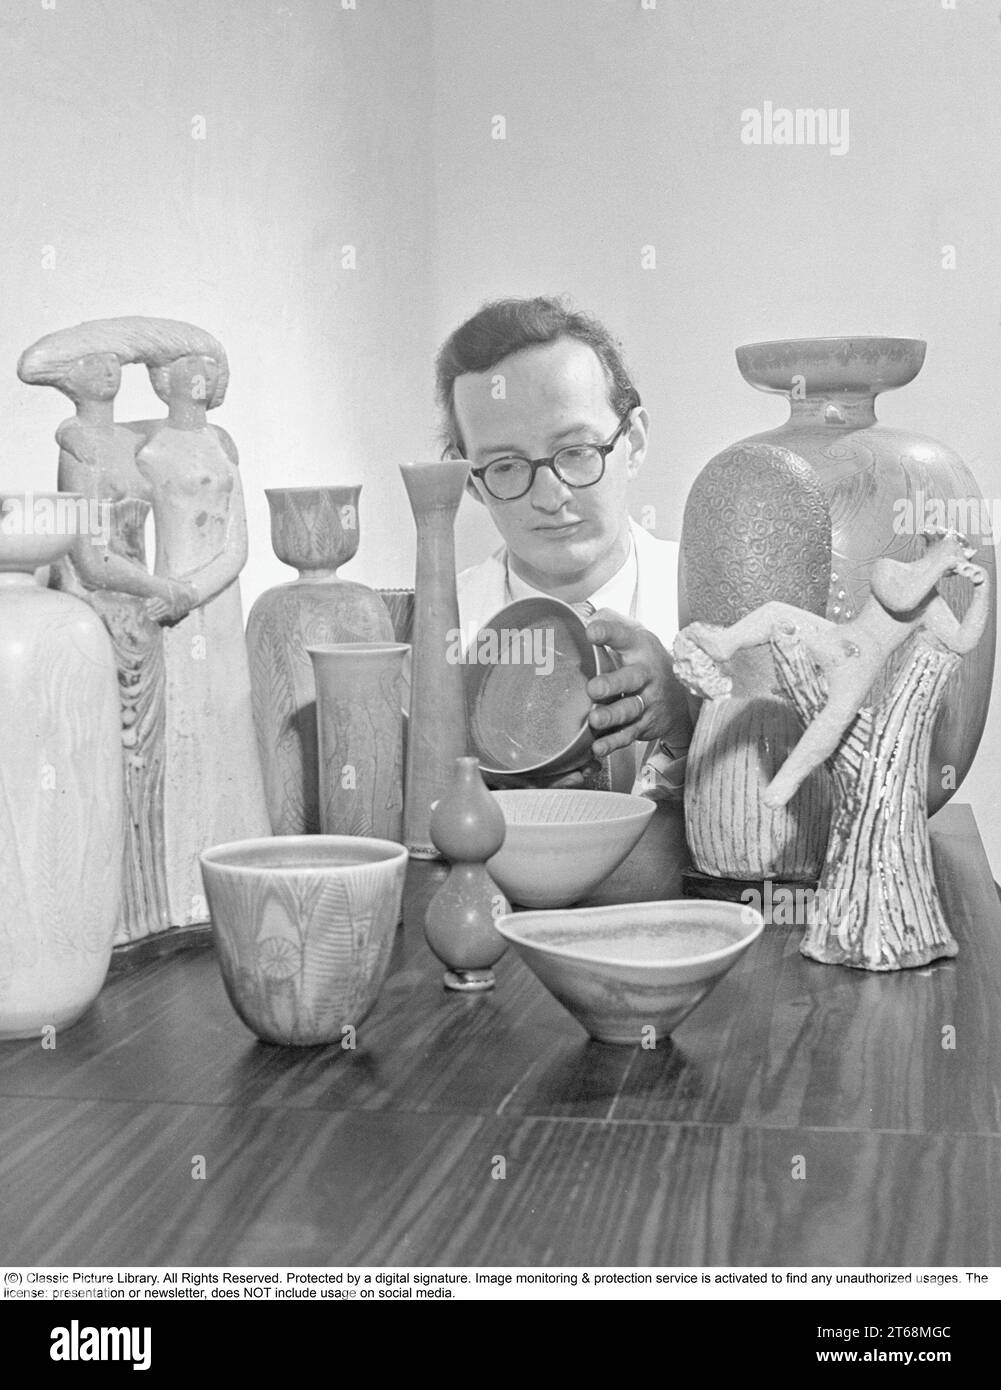 Stig Lindberg (17 August 1916 in Umeå, Sweden – 7 April 1982 in San Felice Circeo, Italy) was a Swedish ceramic designer, glass designer, textile designer, industrial designer, painter, and illustrator.   One of Sweden's most important postwar designers, Lindberg created whimsical studio ceramics and graceful tableware lines during a long career with the Gustavsberg pottery factory. Stig Lindberg studied painting at the University College of Arts, Crafts and Design. In 1937, he went to work at Gustavsberg under Wilhelm Kåge. In 1949, he was named Kåge's successor as art director. From this per Stock Photo